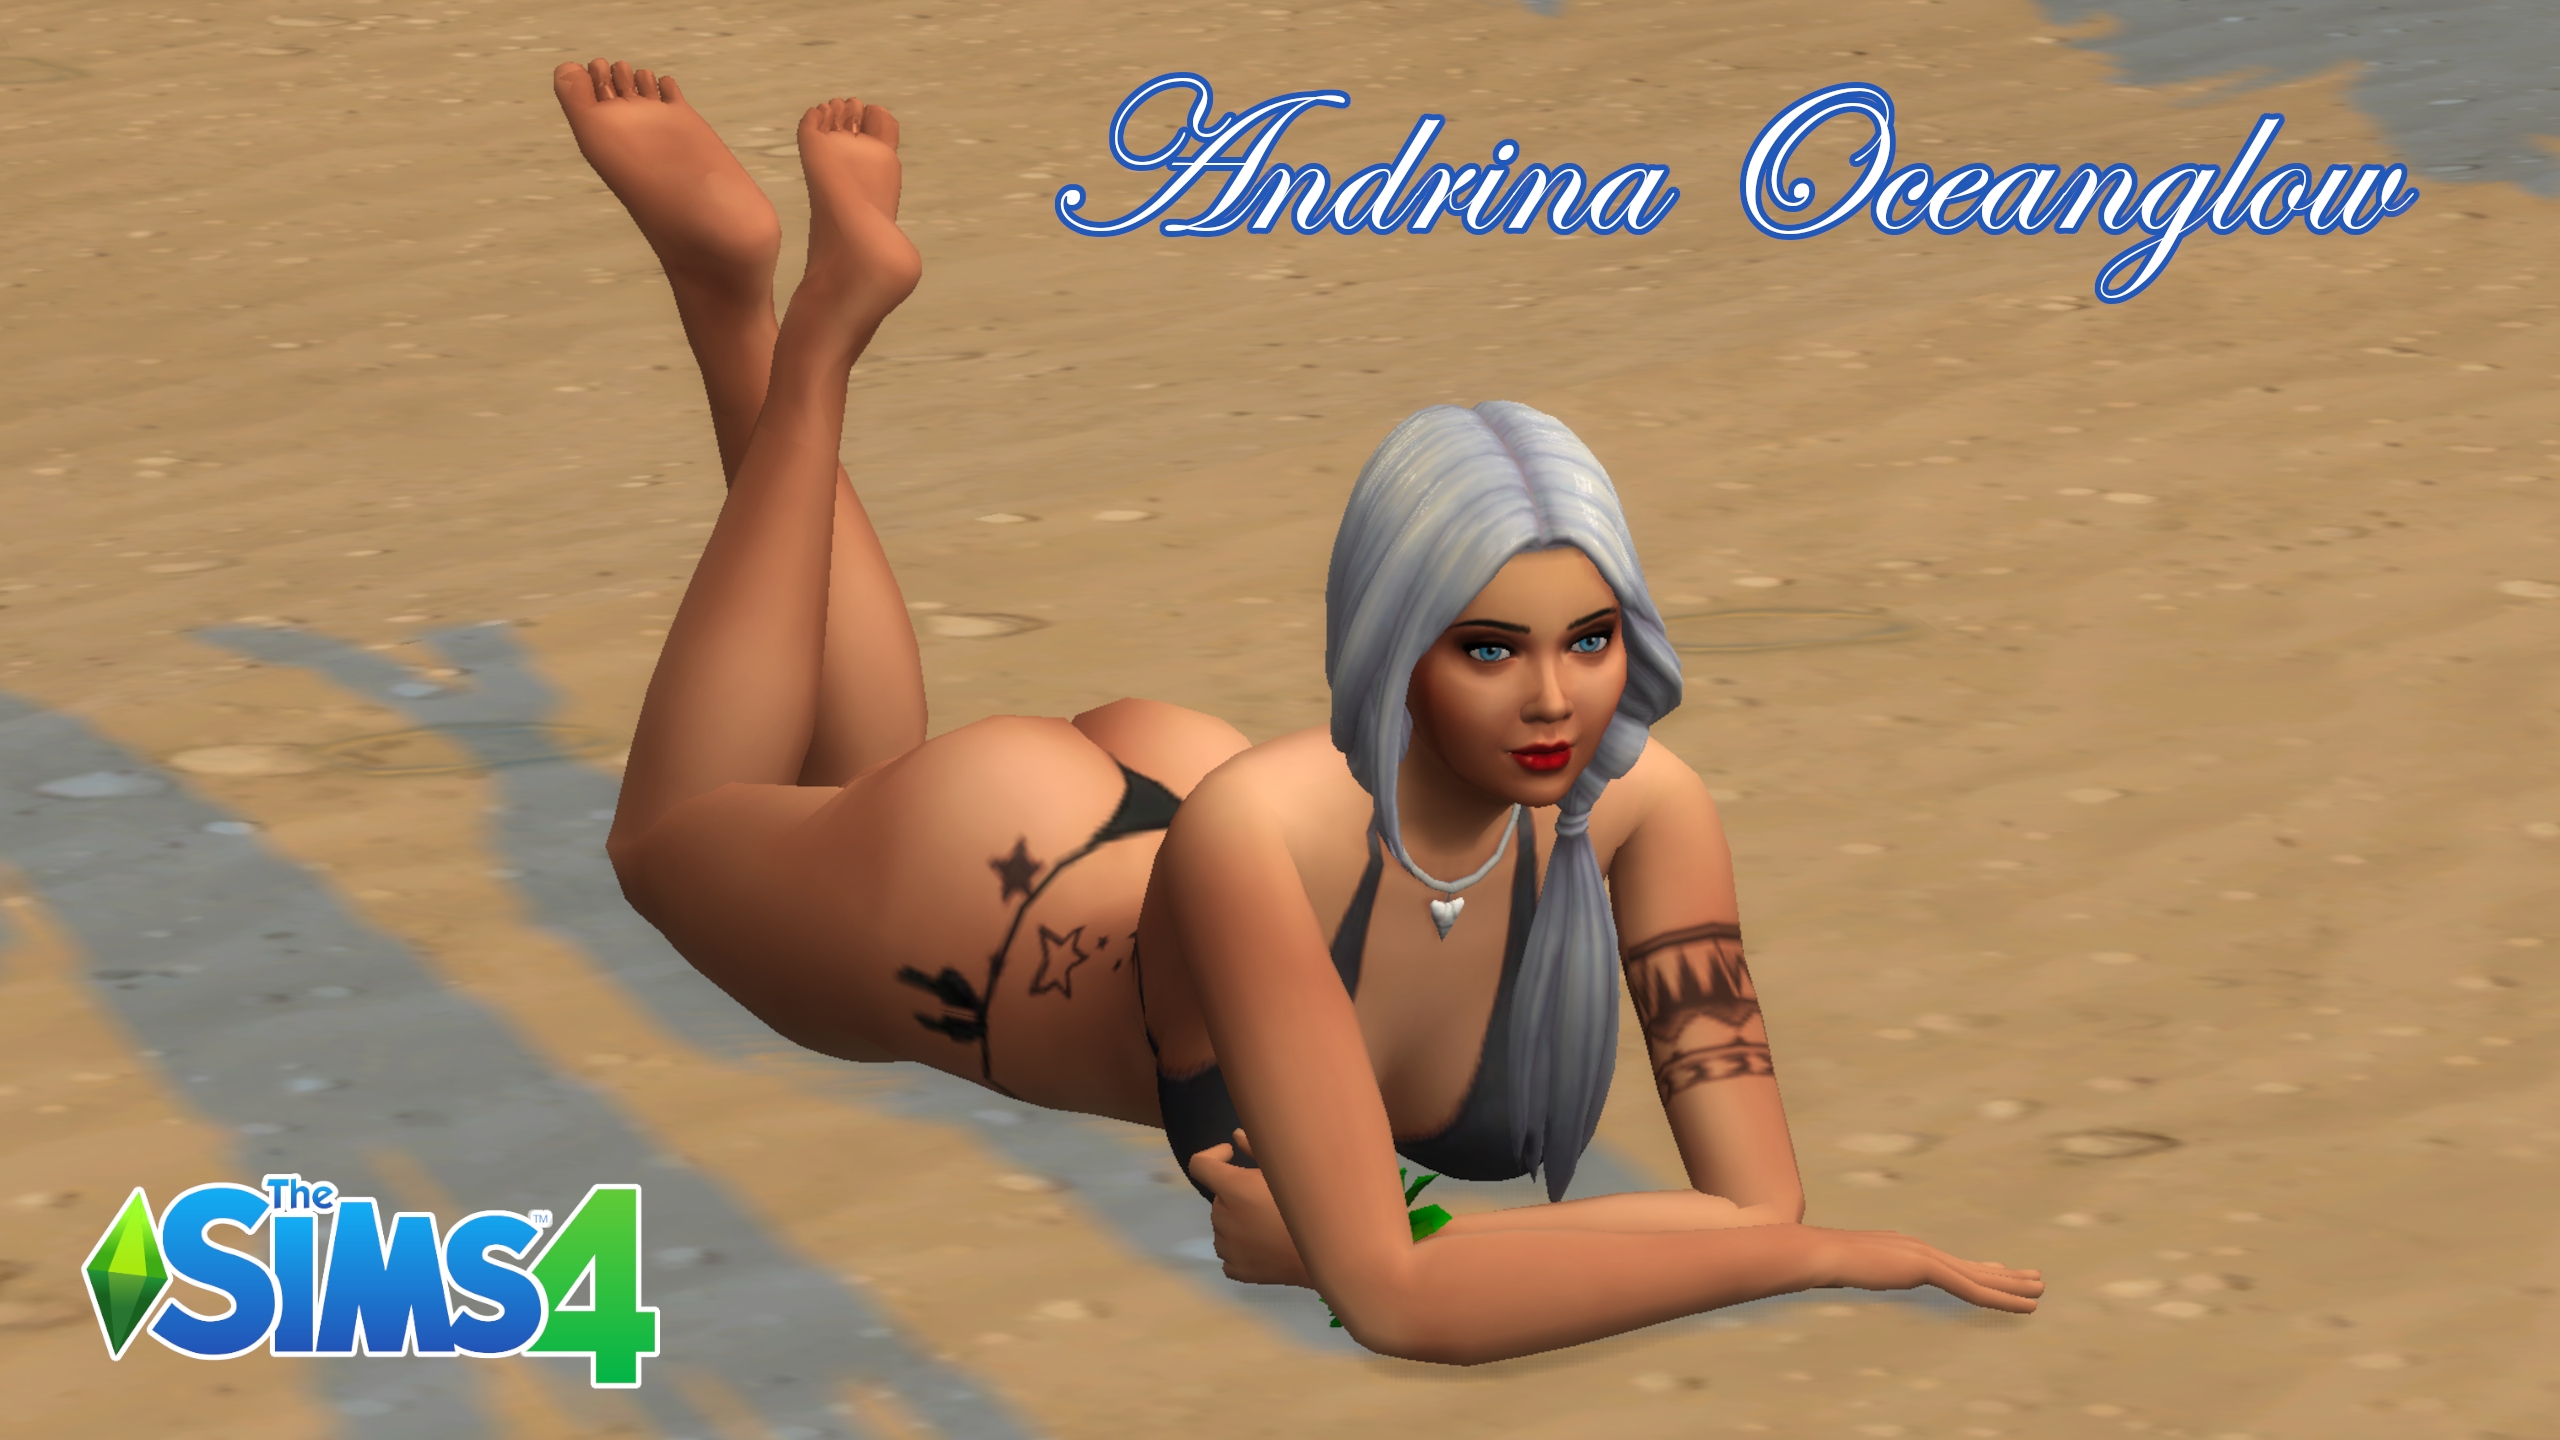 Sims 4 - Mermaid Andrina Oceanglow The Sims 4 Mermaid Siren White Hair Bustyfemale Thong Big Ass Toned Female Topless 7